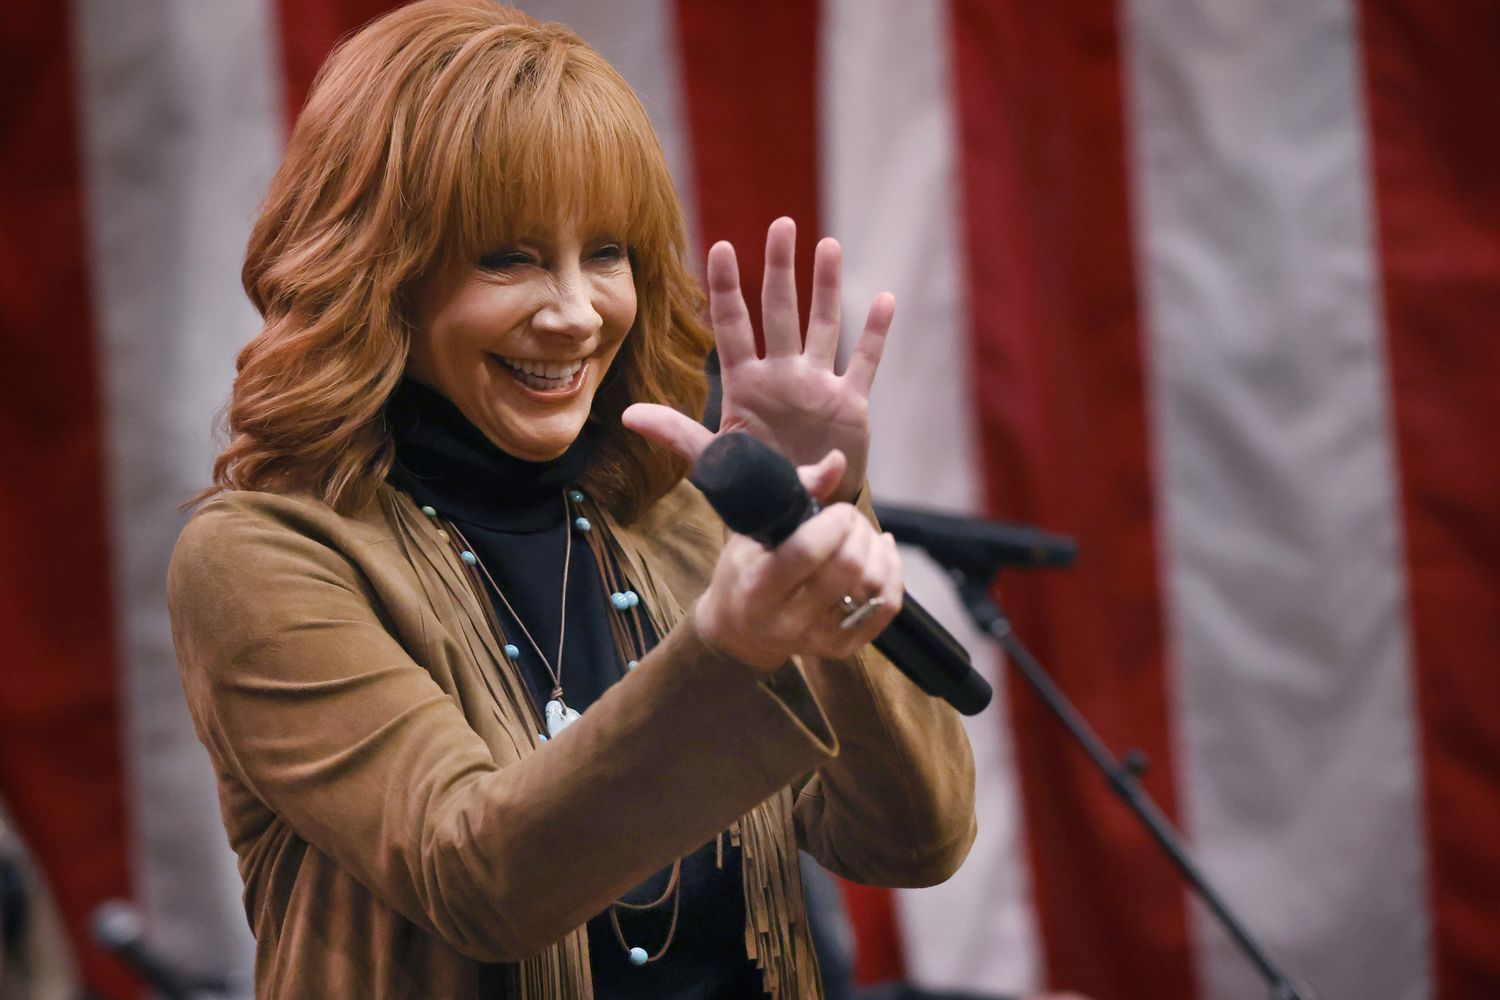 Country music legend Reba McEntire performed before friends, officials and media gathered...